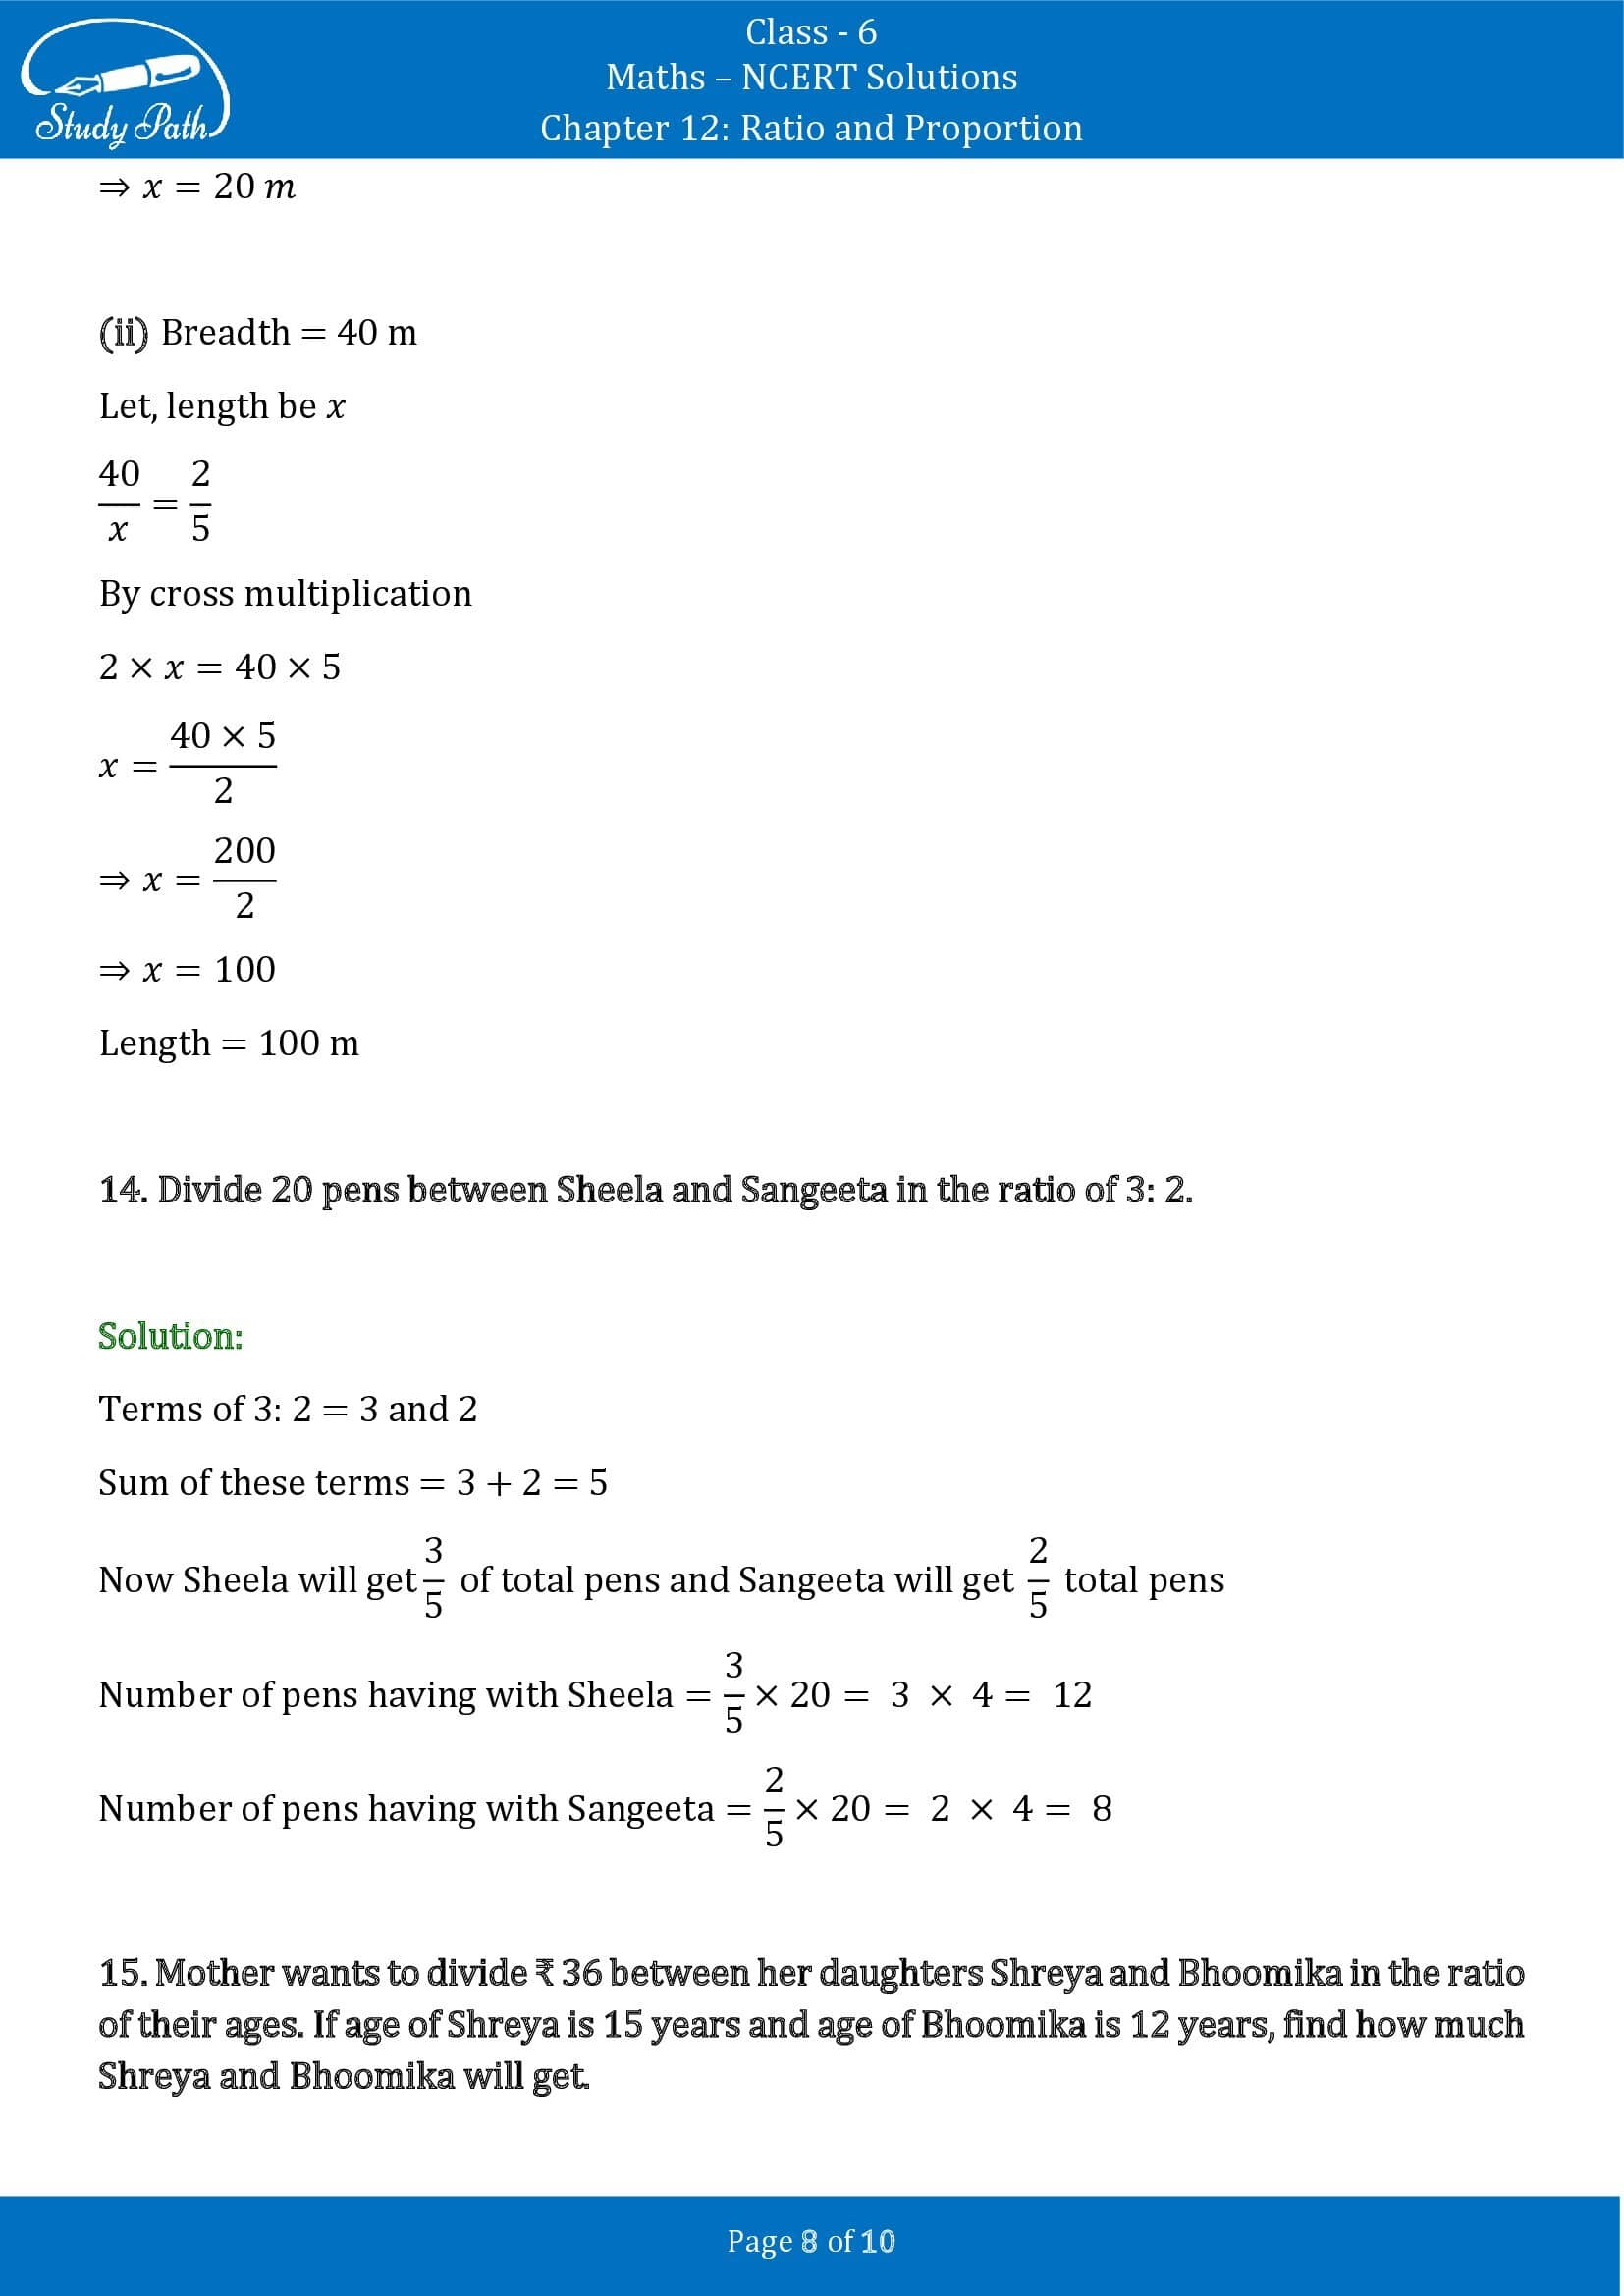 NCERT Solutions for Class 6 Maths Chapter 12 Ratio and Proportion Exercise 12.1 00008